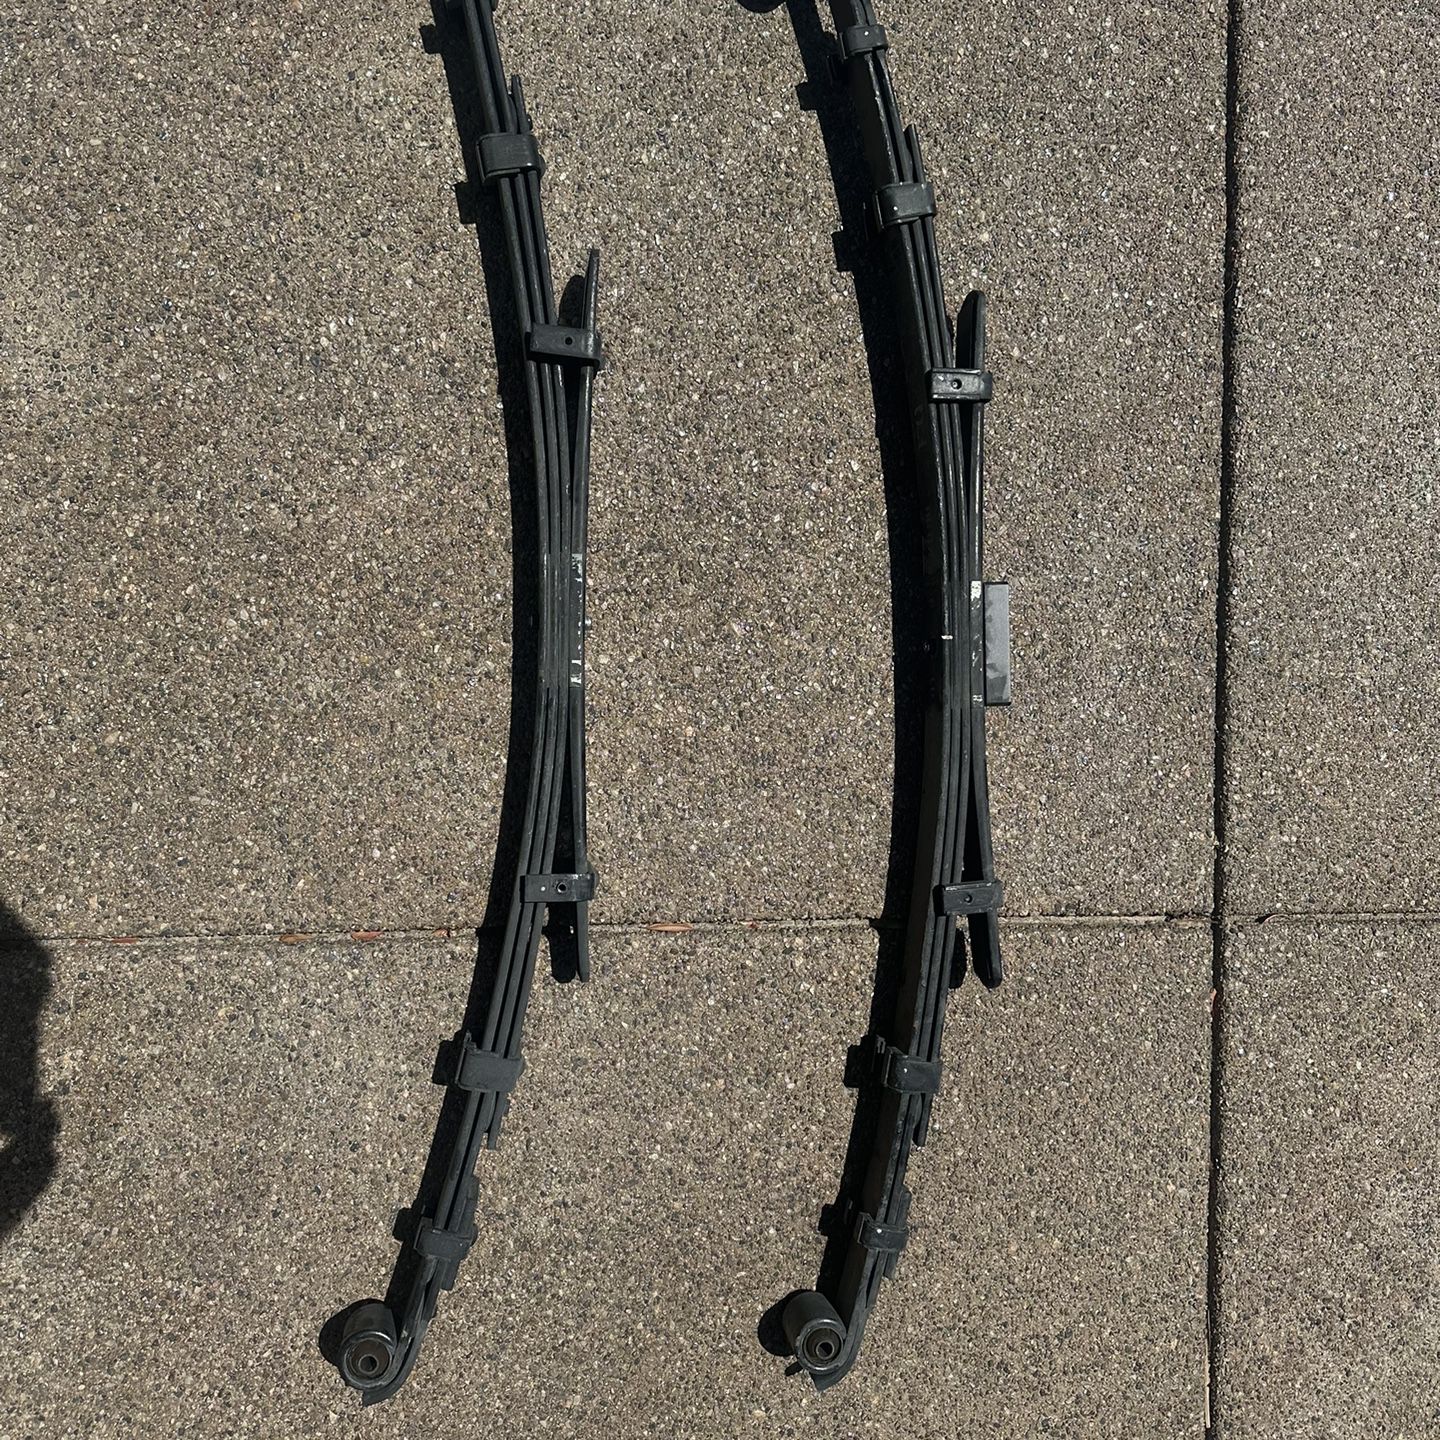 Leaf Springs From 21TRD Pro Tacoma